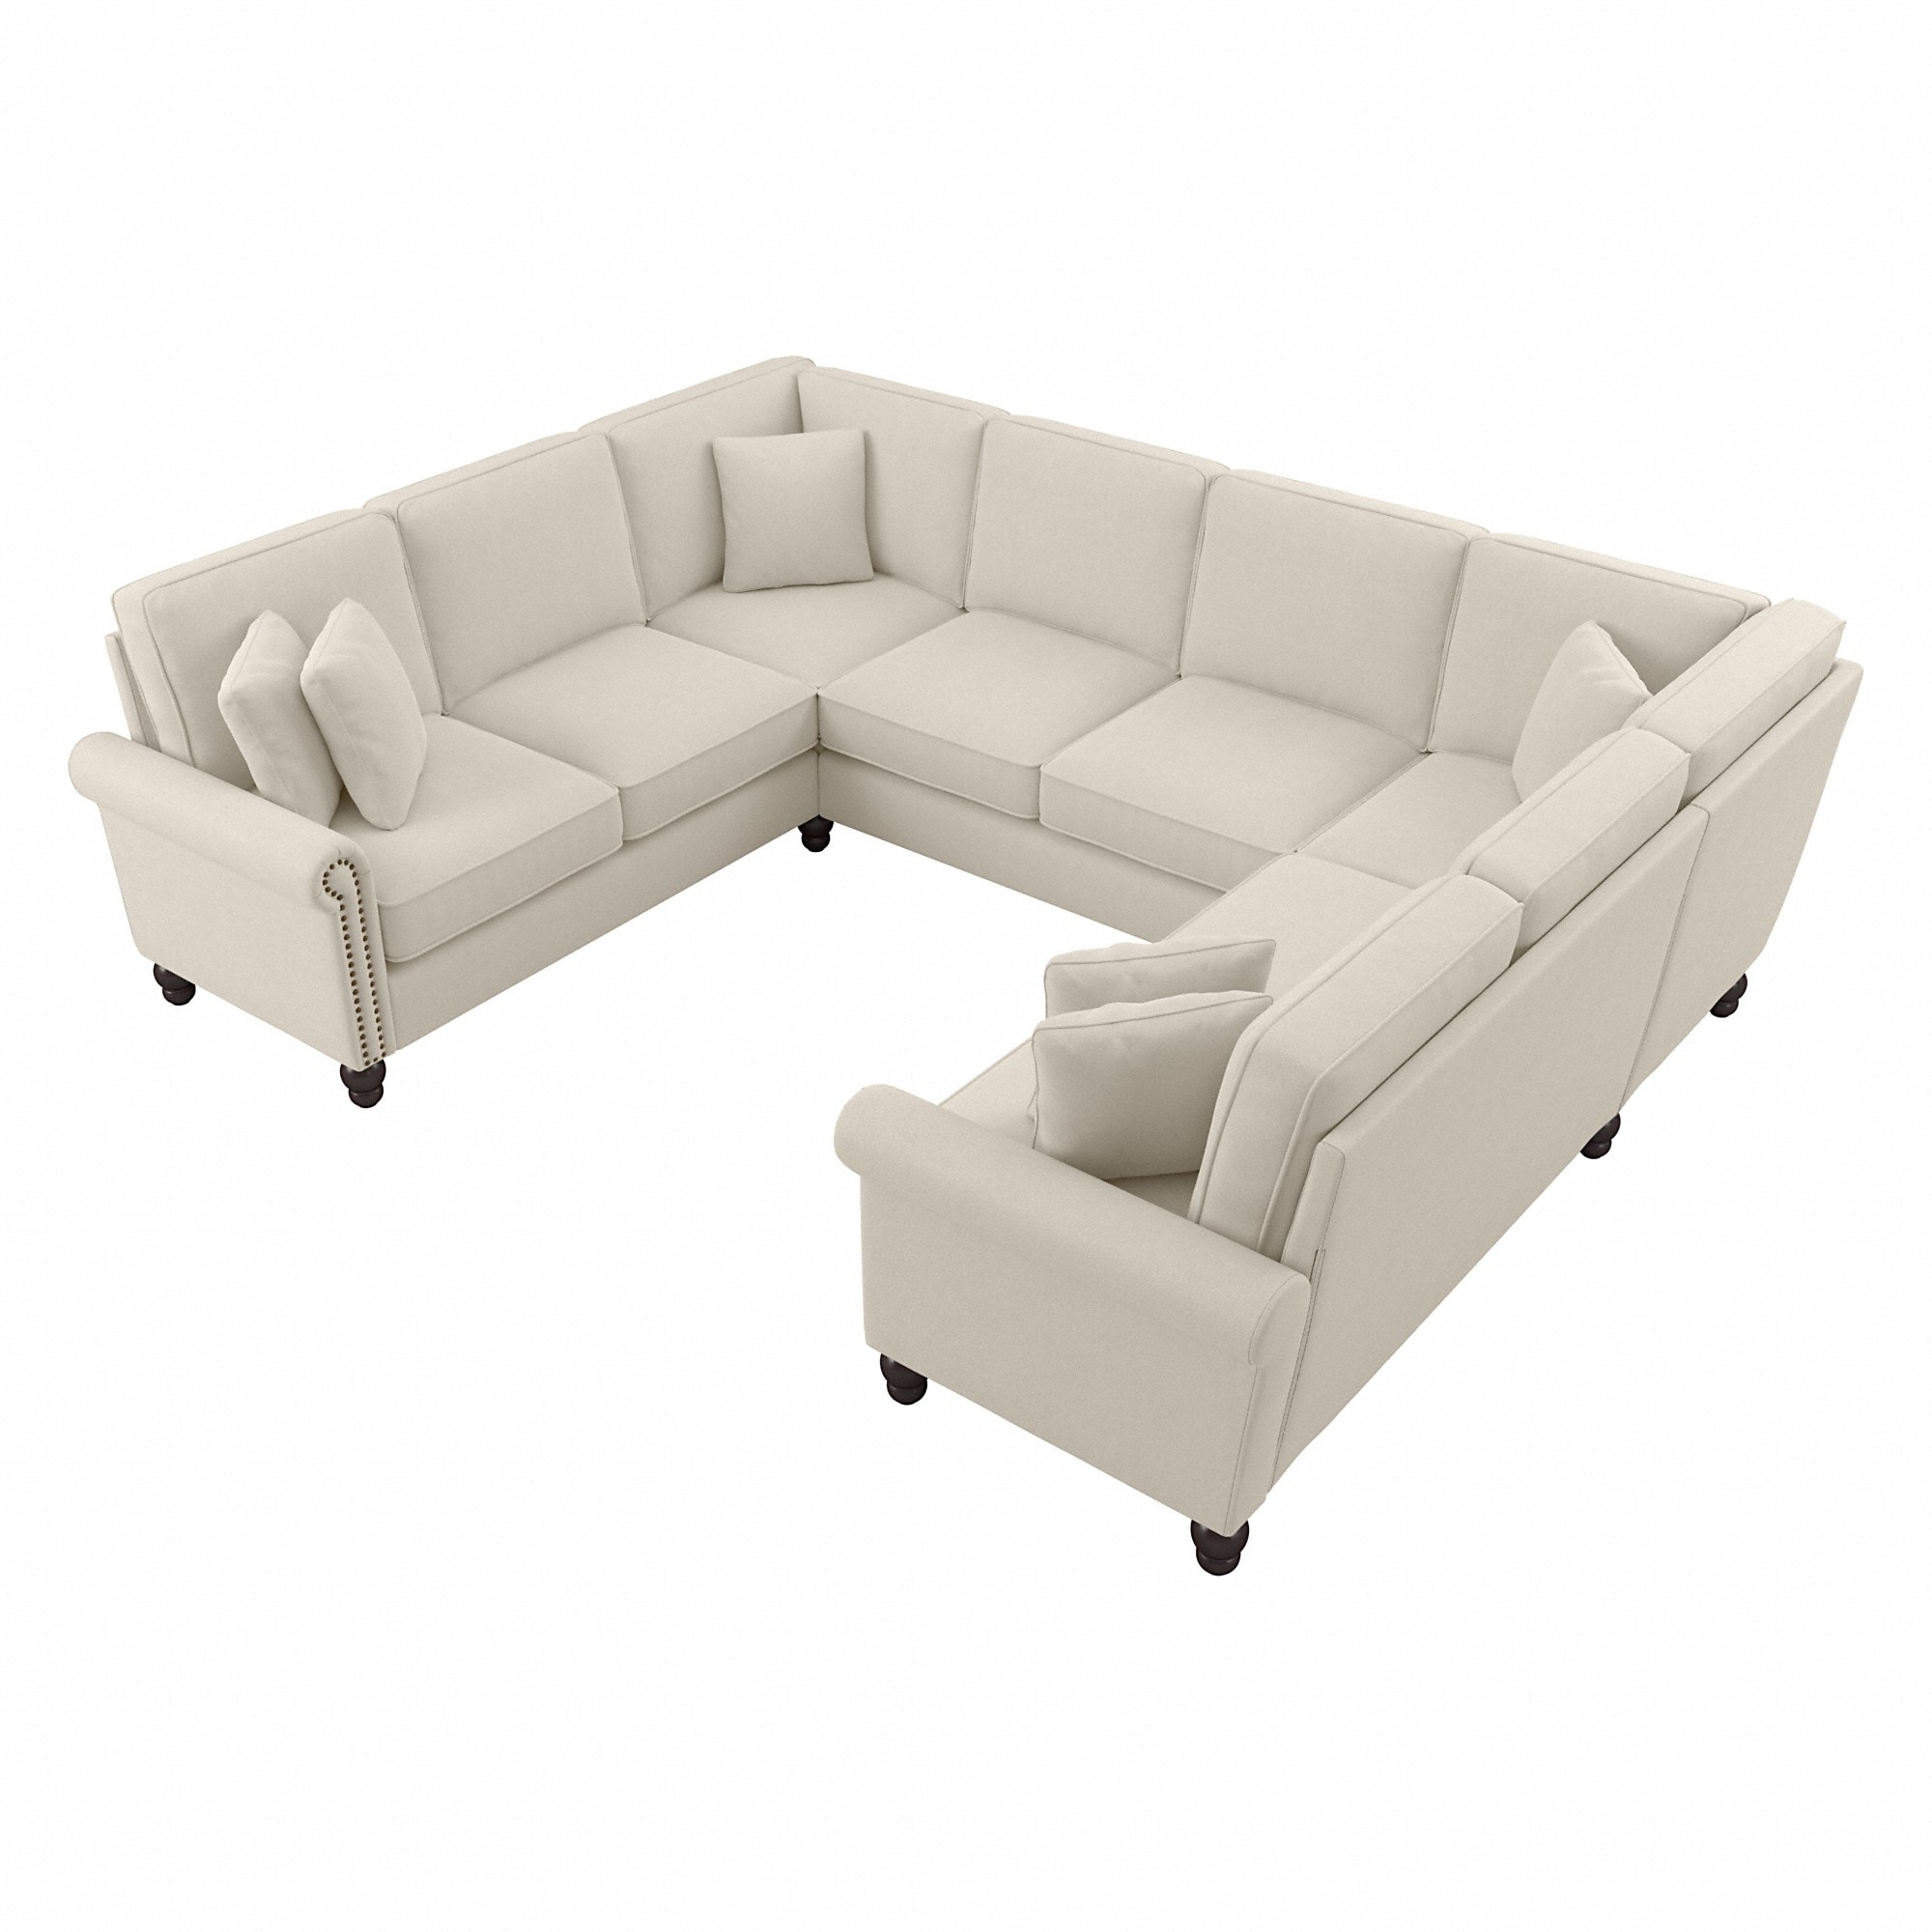 Bush Furniture Coventry 113W U Shaped Sectional Couch by